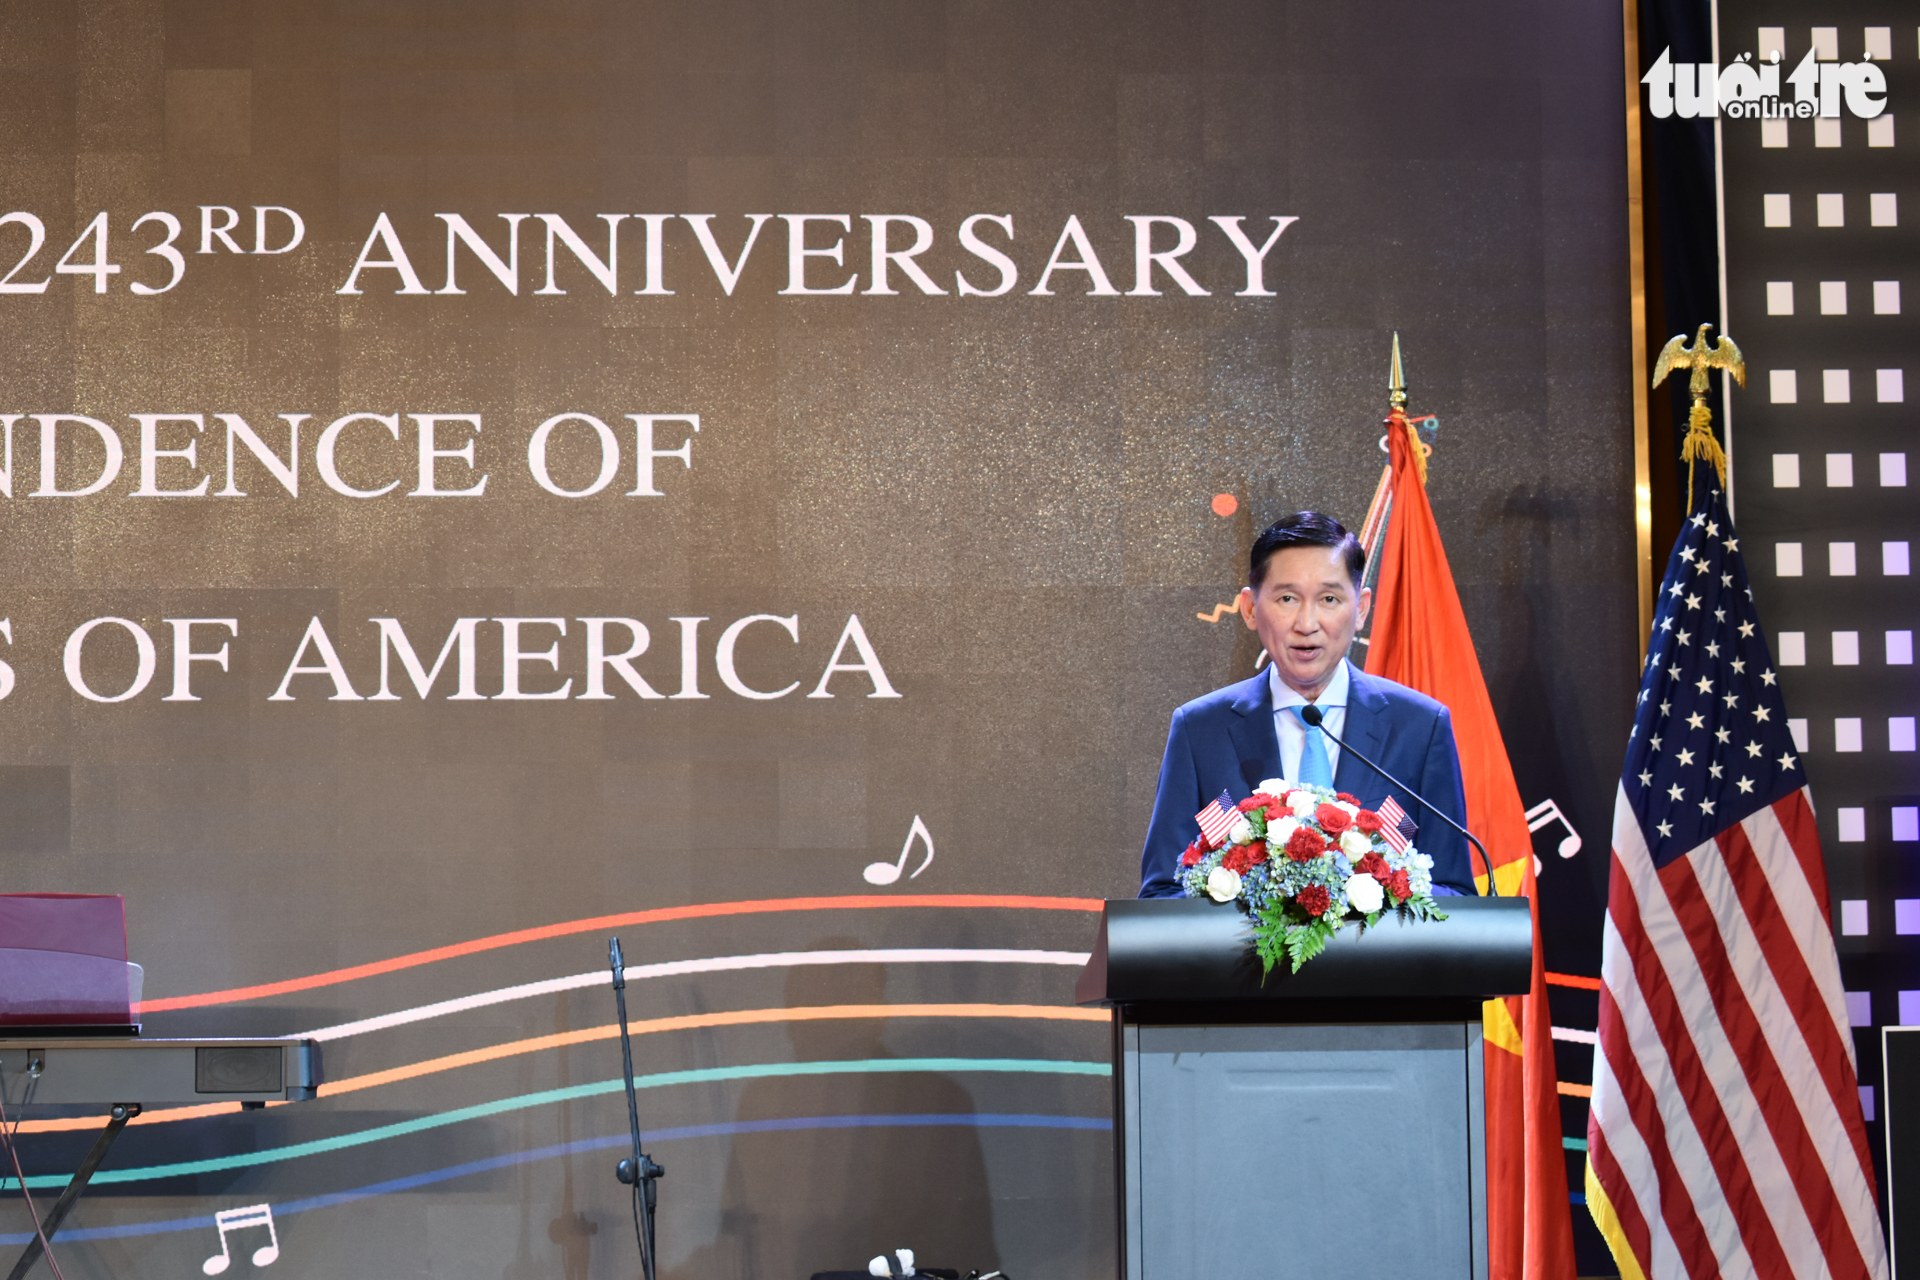 Ho Chi Minh City deputy chairman Tran Vinh Tuyen addresses an event celebrating the 243rd U.S. Independence Day in Ho Chi Minh City on June 5, 2019. Photo: Tuan Son / Tuoi Tre News